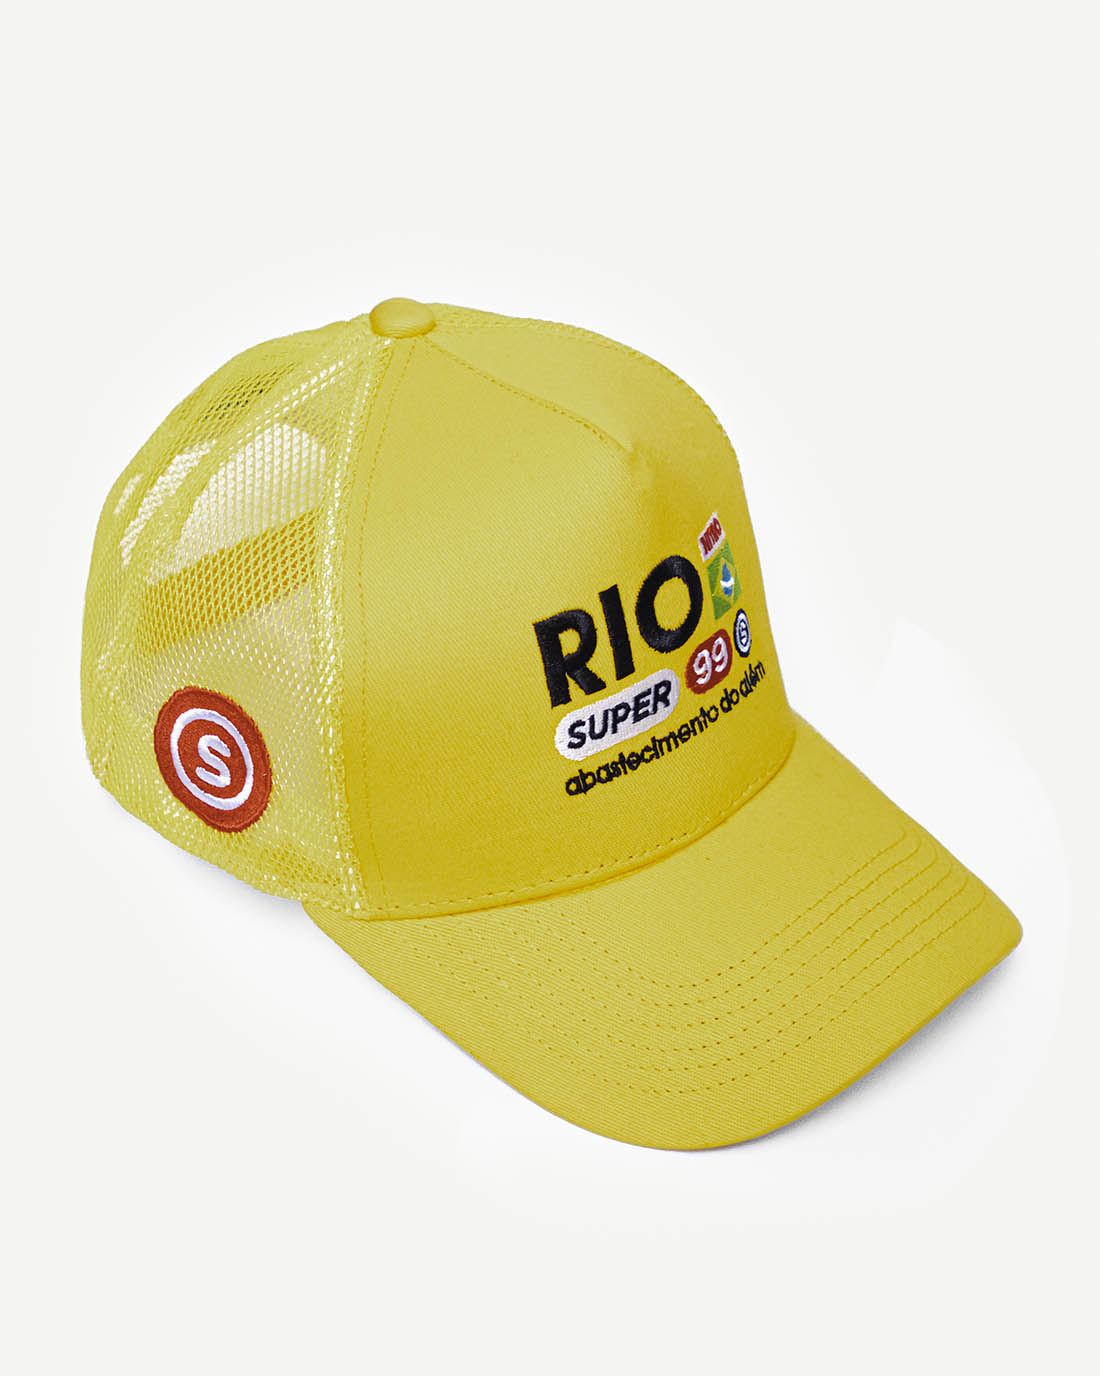 Front side view of a vibrant yellow snapback hat with Brazilian-inspired embroidered design and cooling mesh back.